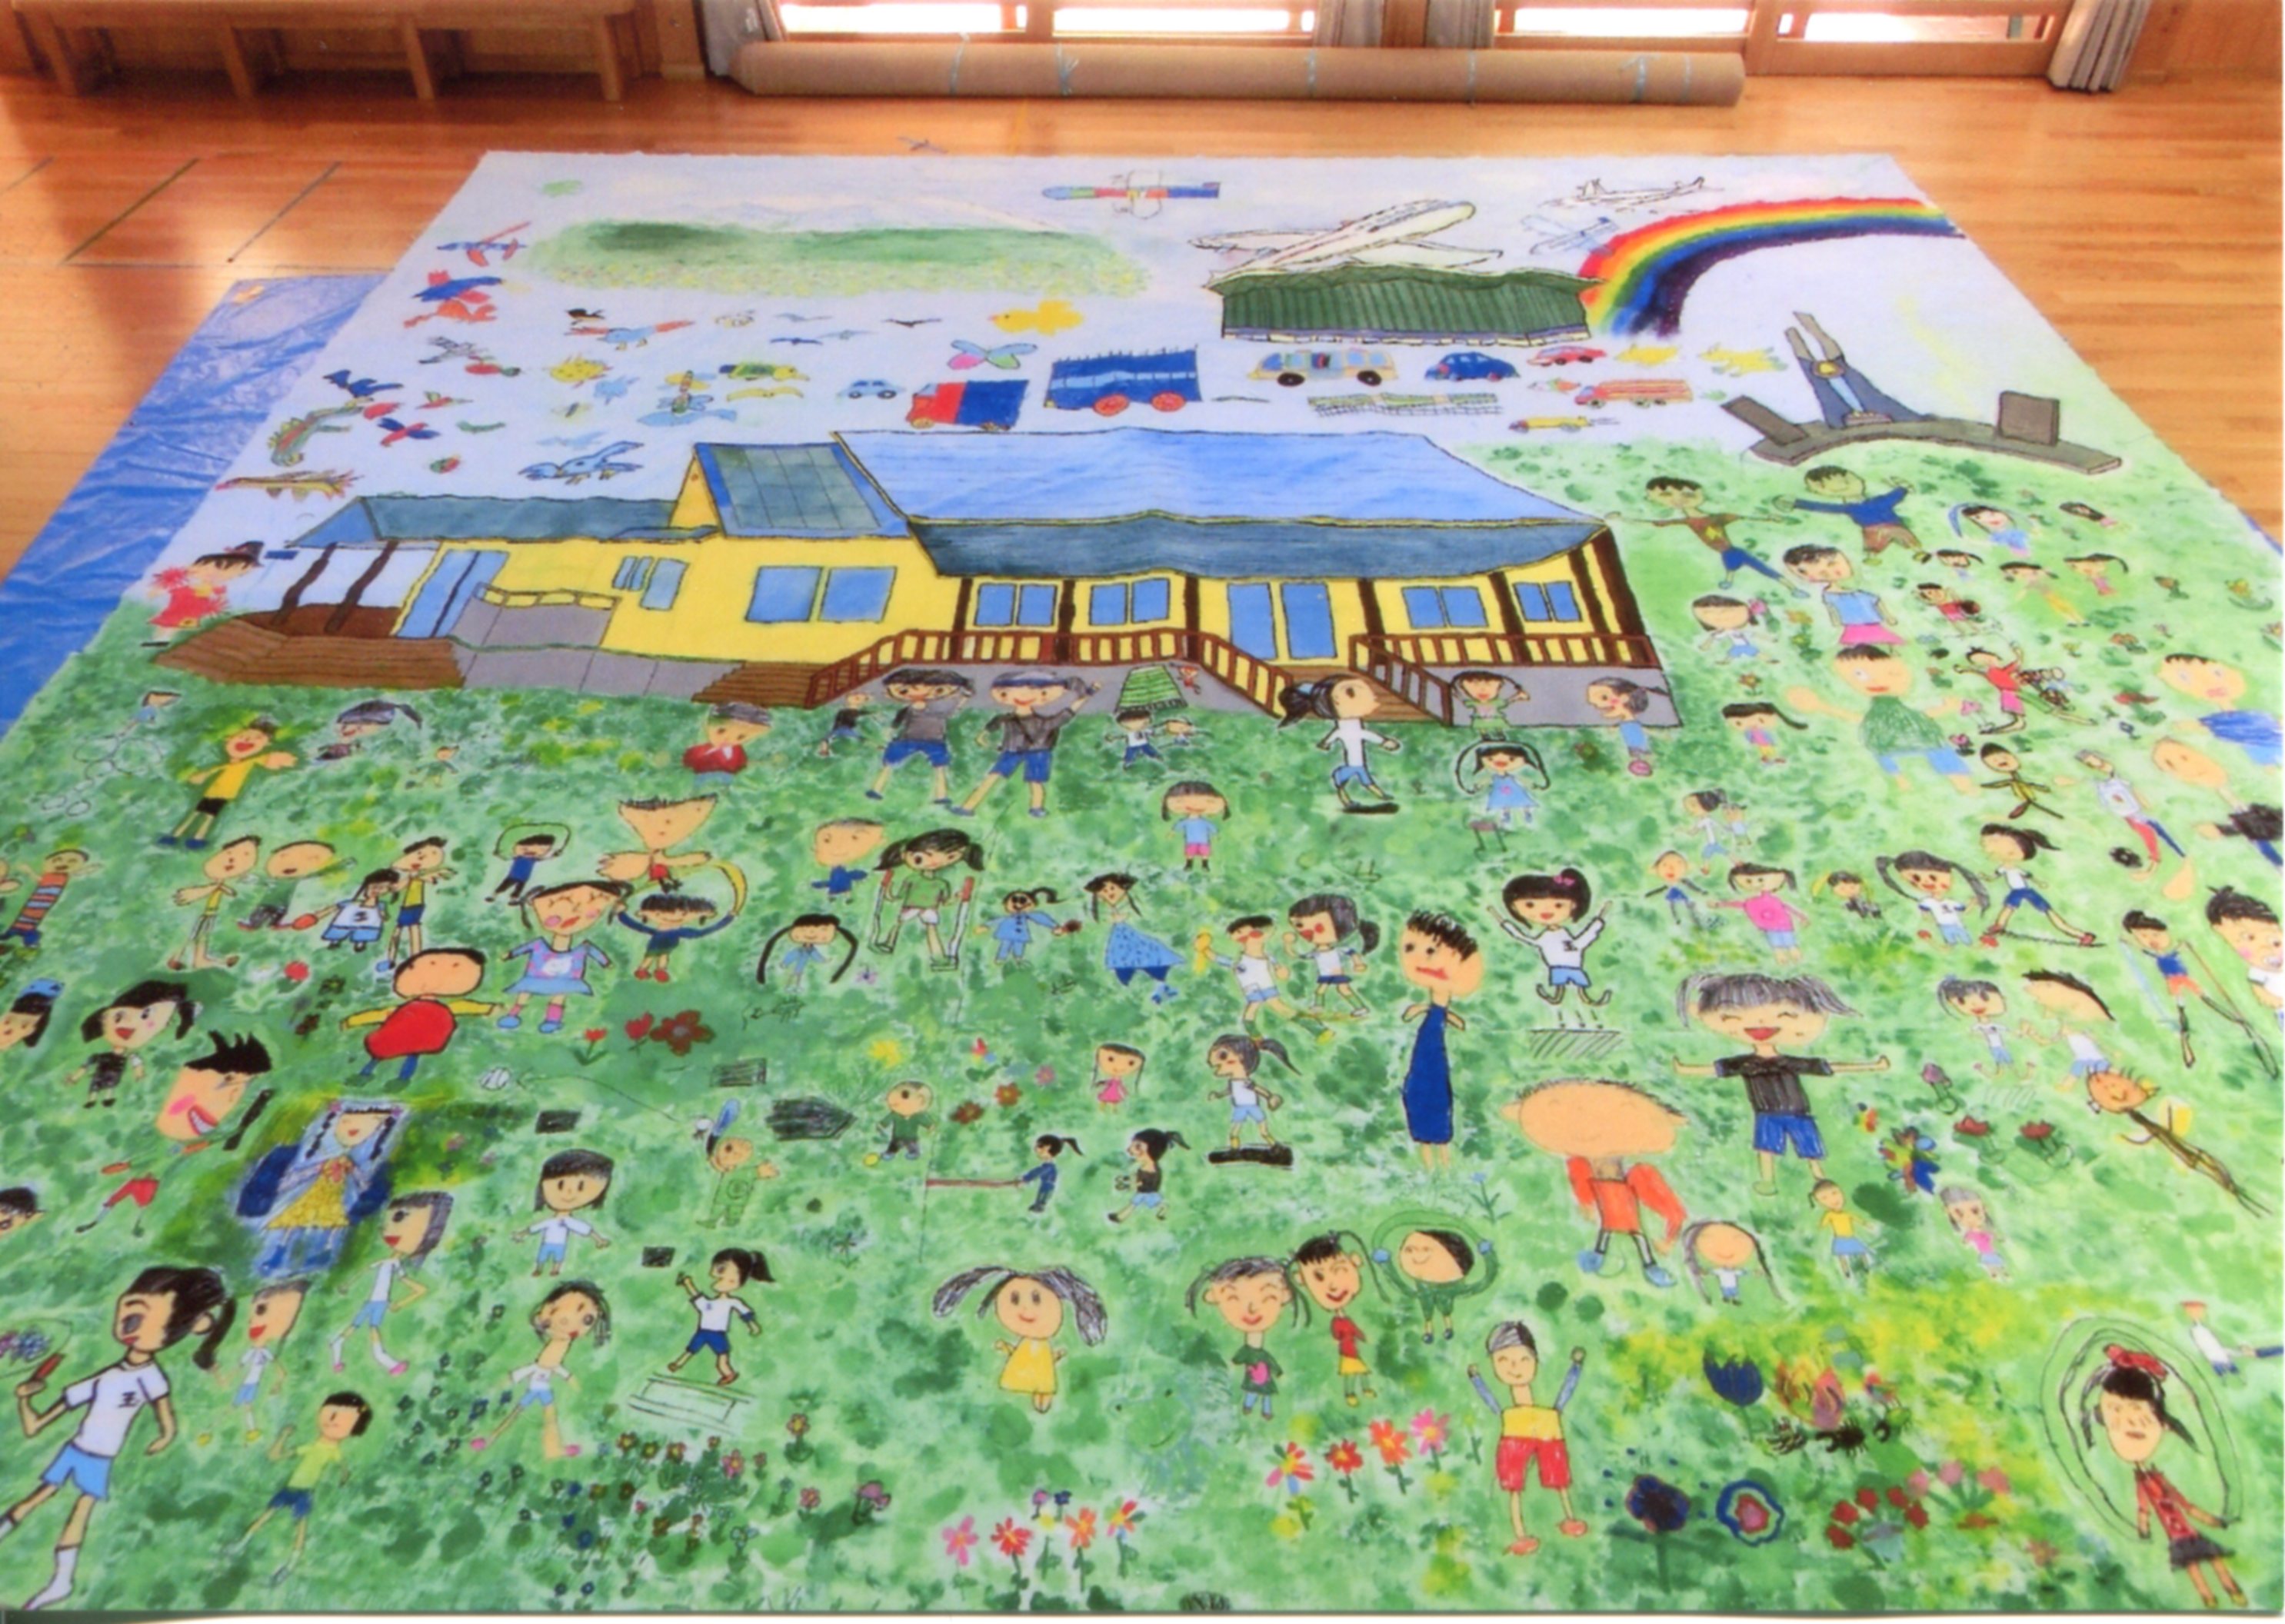 The Biggest Painting in the World 2020 Iwanuma City was completed